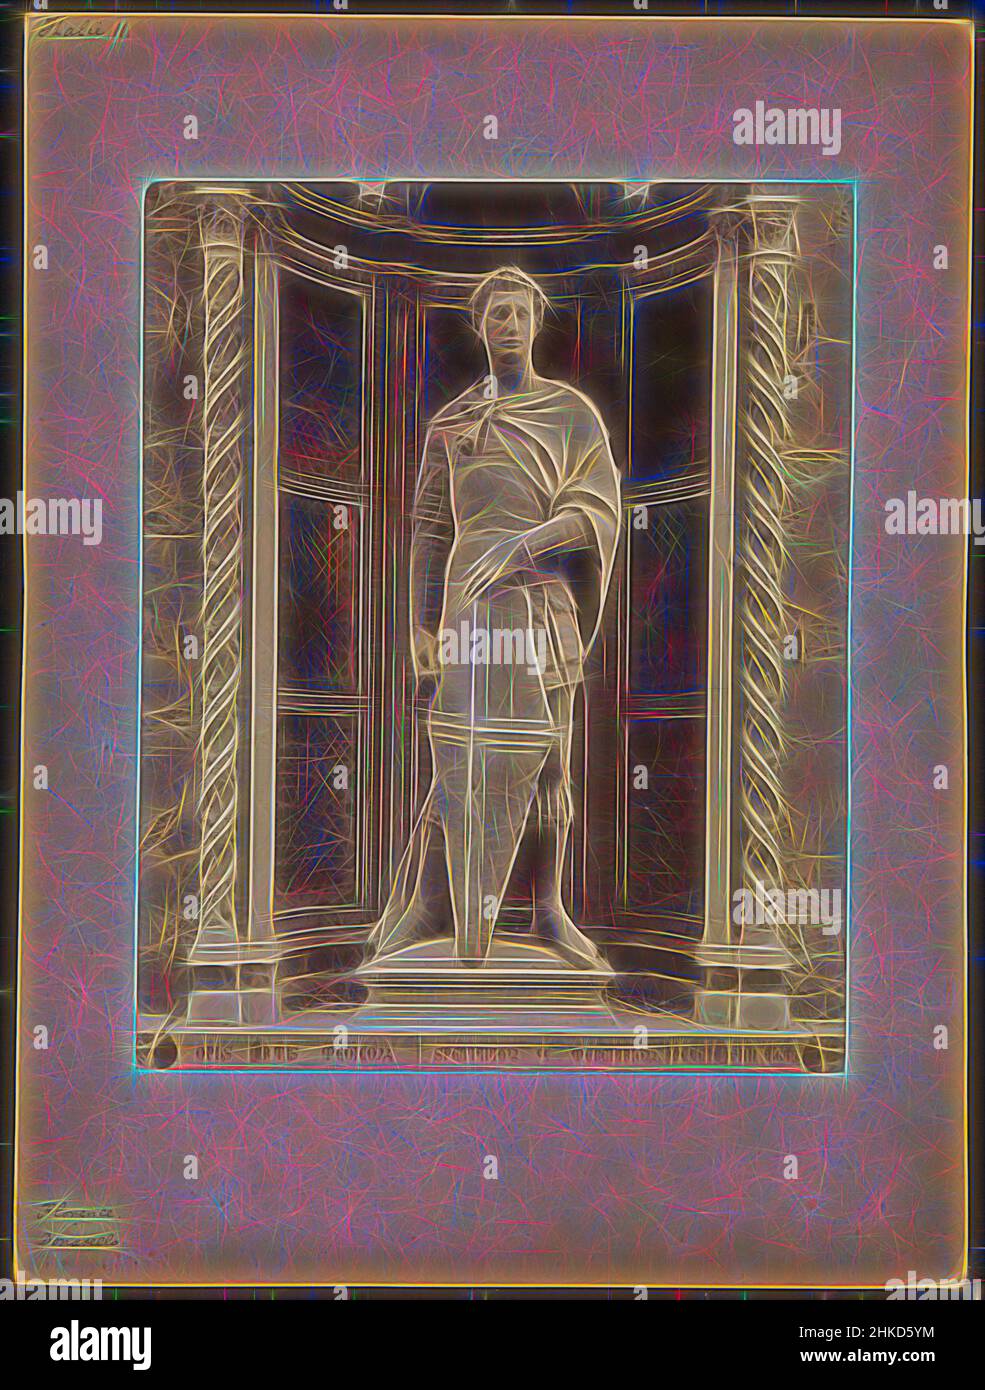 Inspired by Statue of Saint Georgius by Donatello, Orsanmichele, 1850 -  1900, albumen print, height 346 mm × width 259 mm, Reimagined by Artotop.  Classic art reinvented with a modern twist. Design